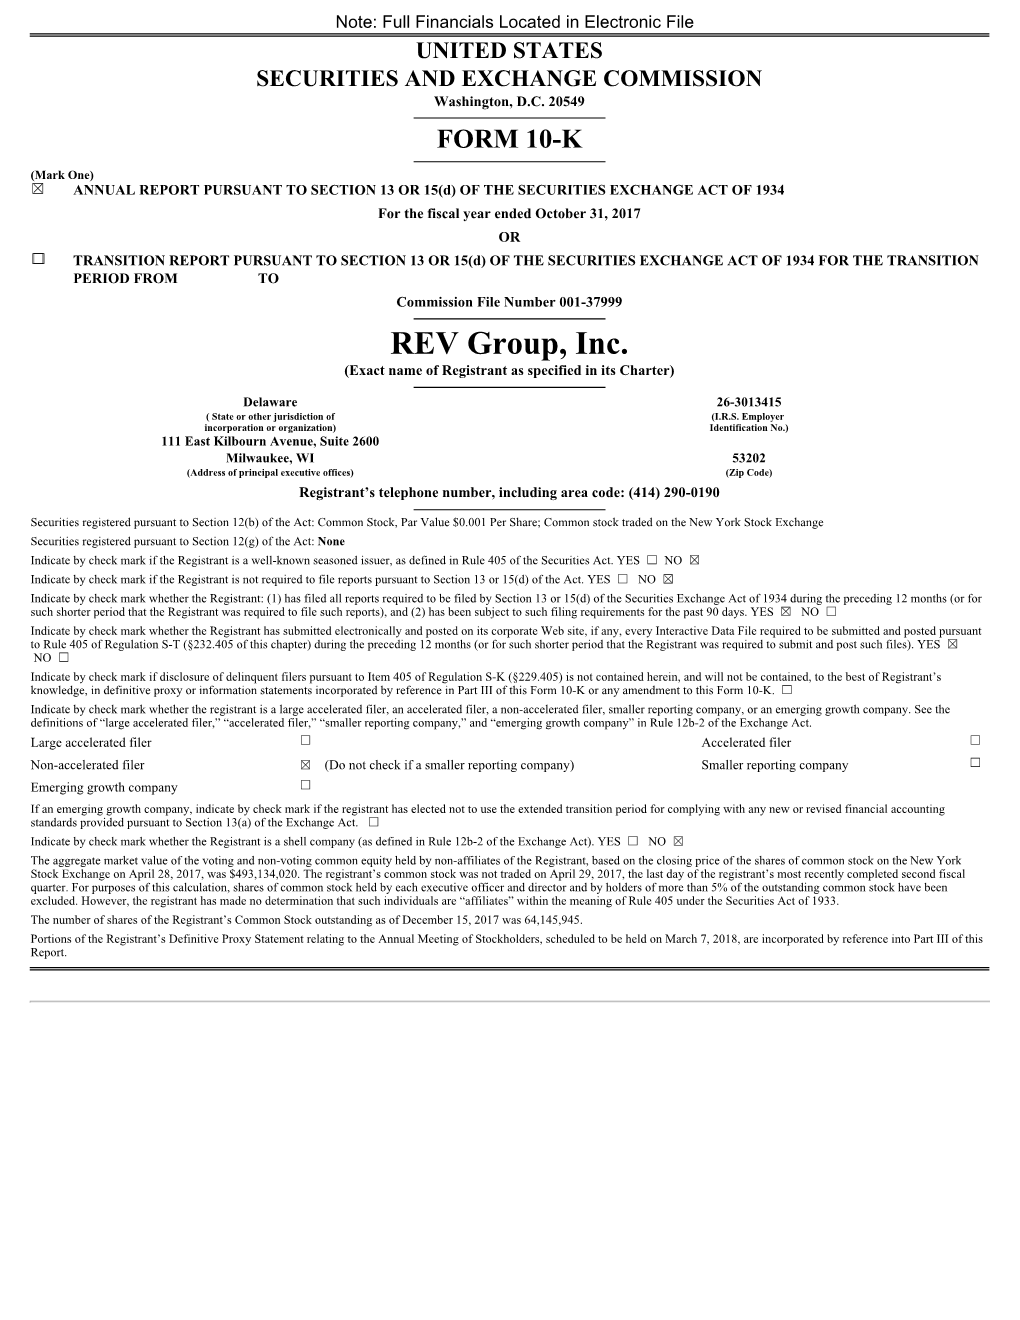 REV Group, Inc. (Exact Name of Registrant As Specified in Its Charter)